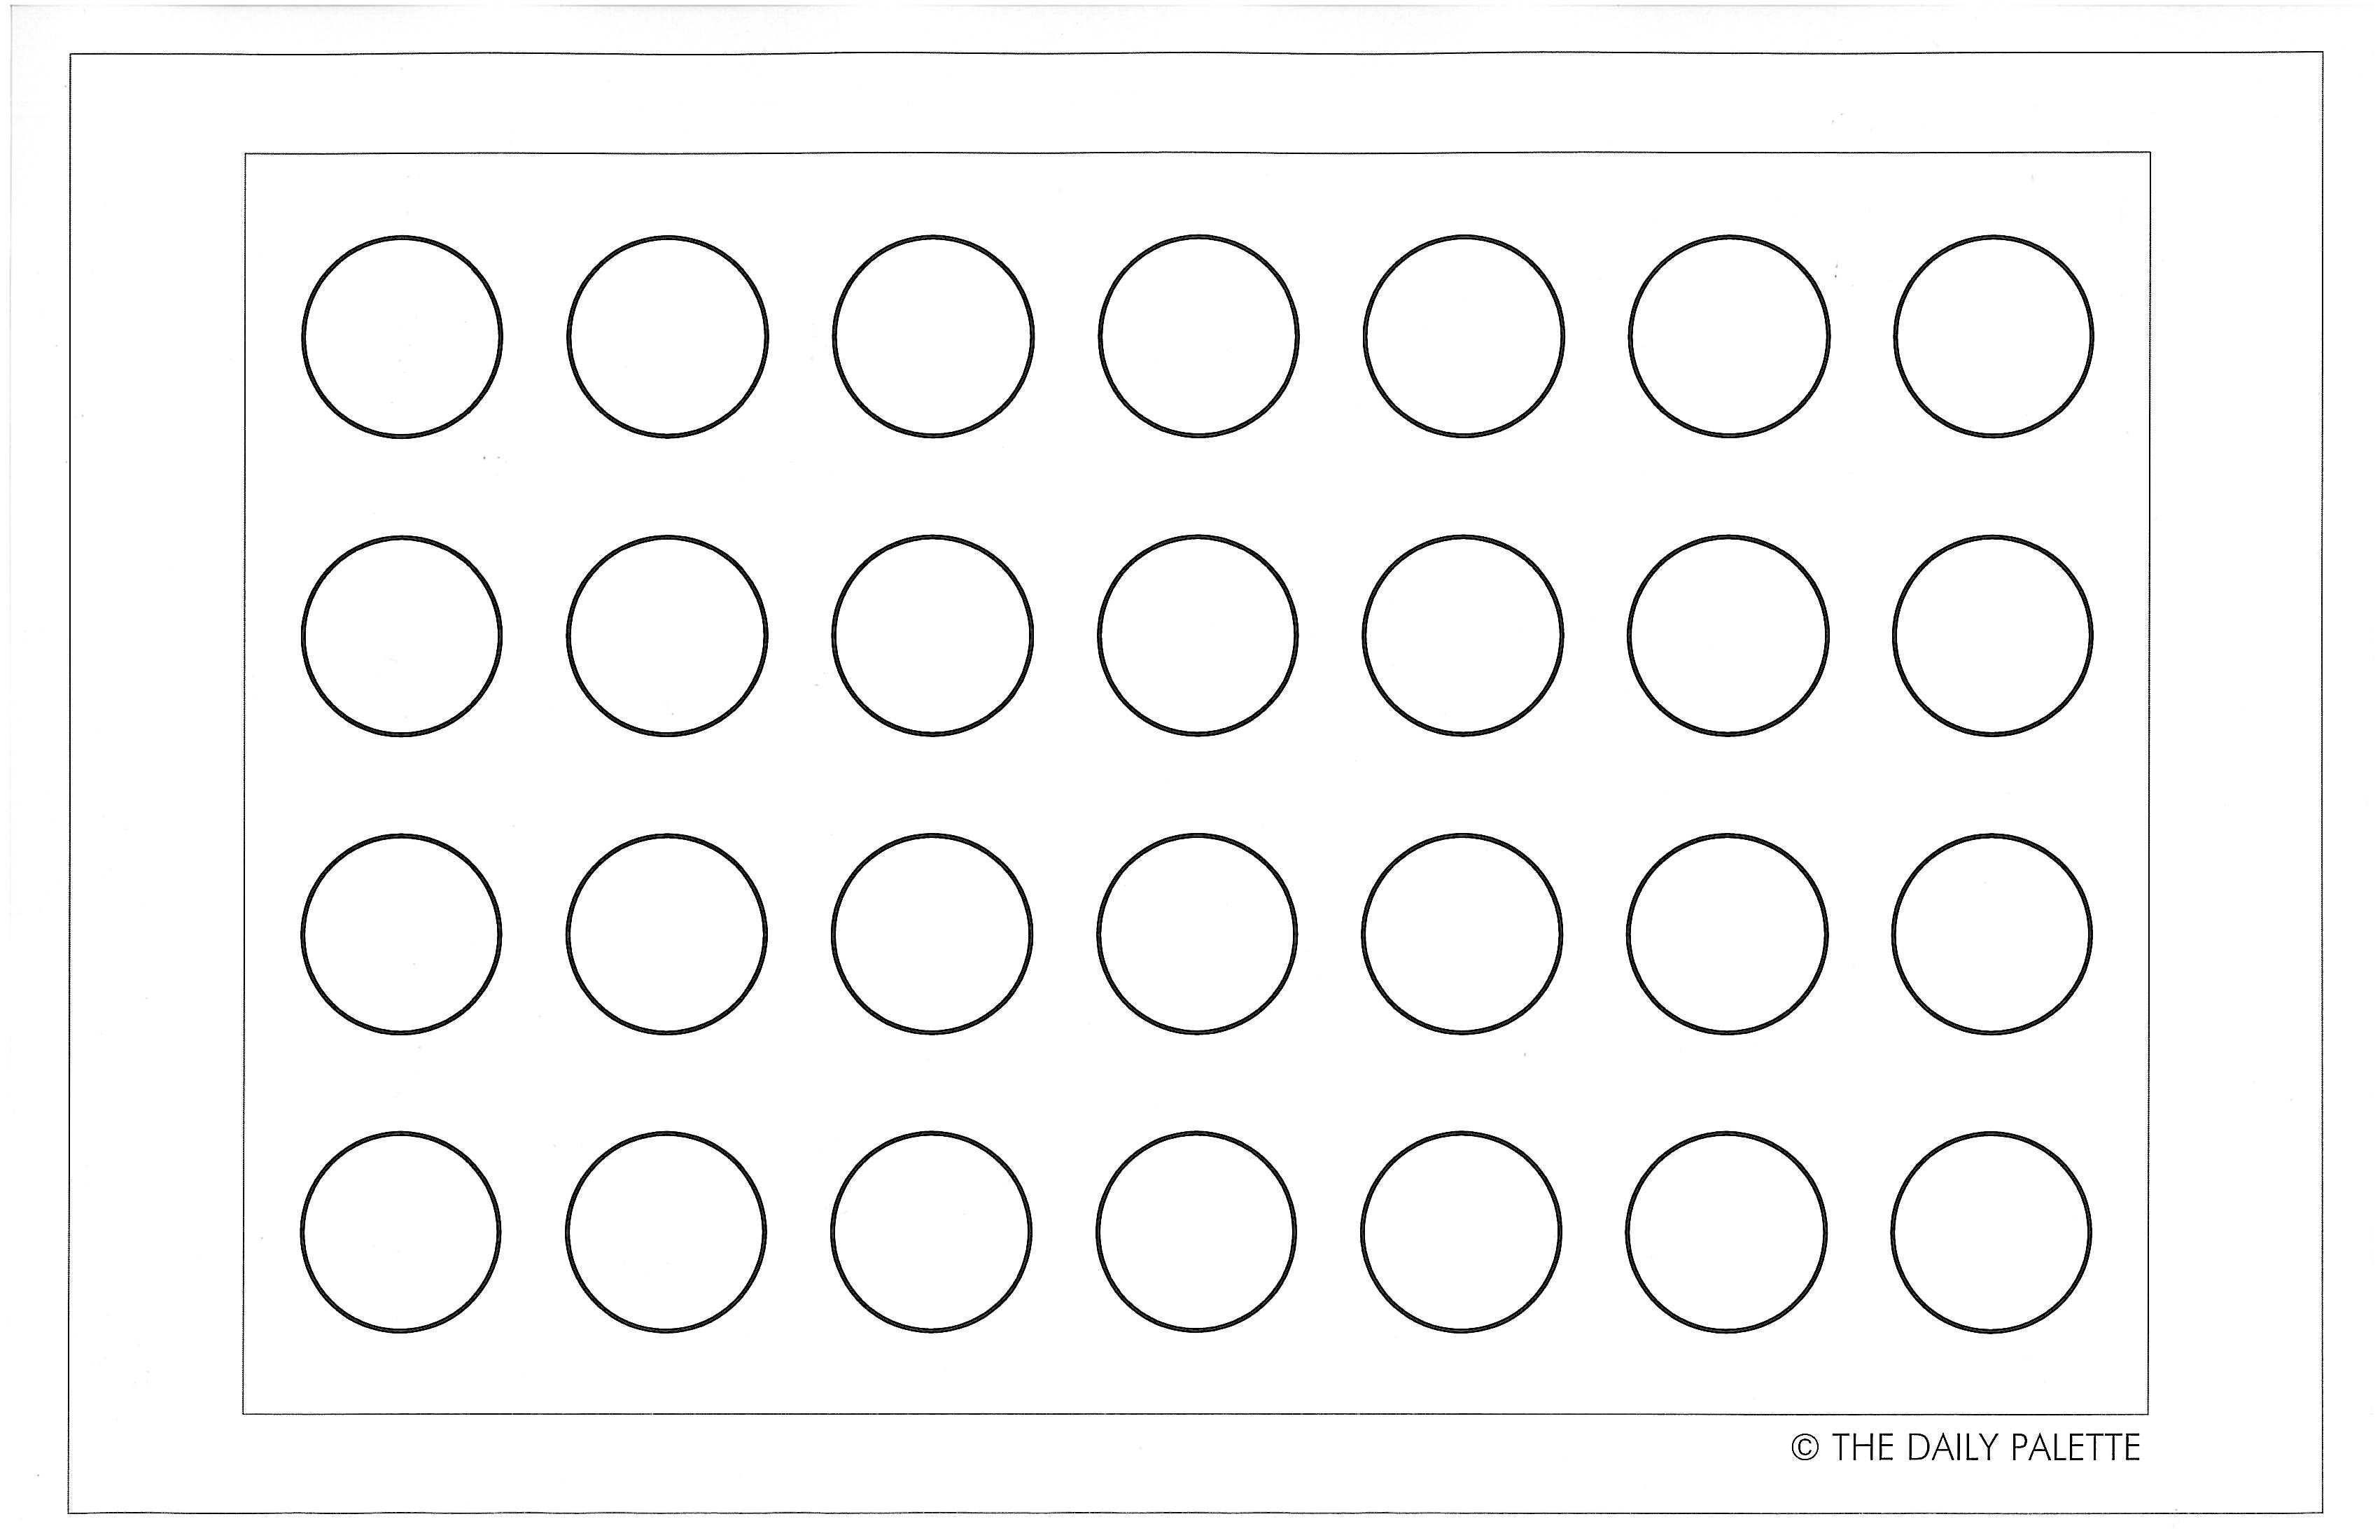 Macaron Baking Sheet Template Macaron Templates to Print Off Maybe I Can toss My Tired